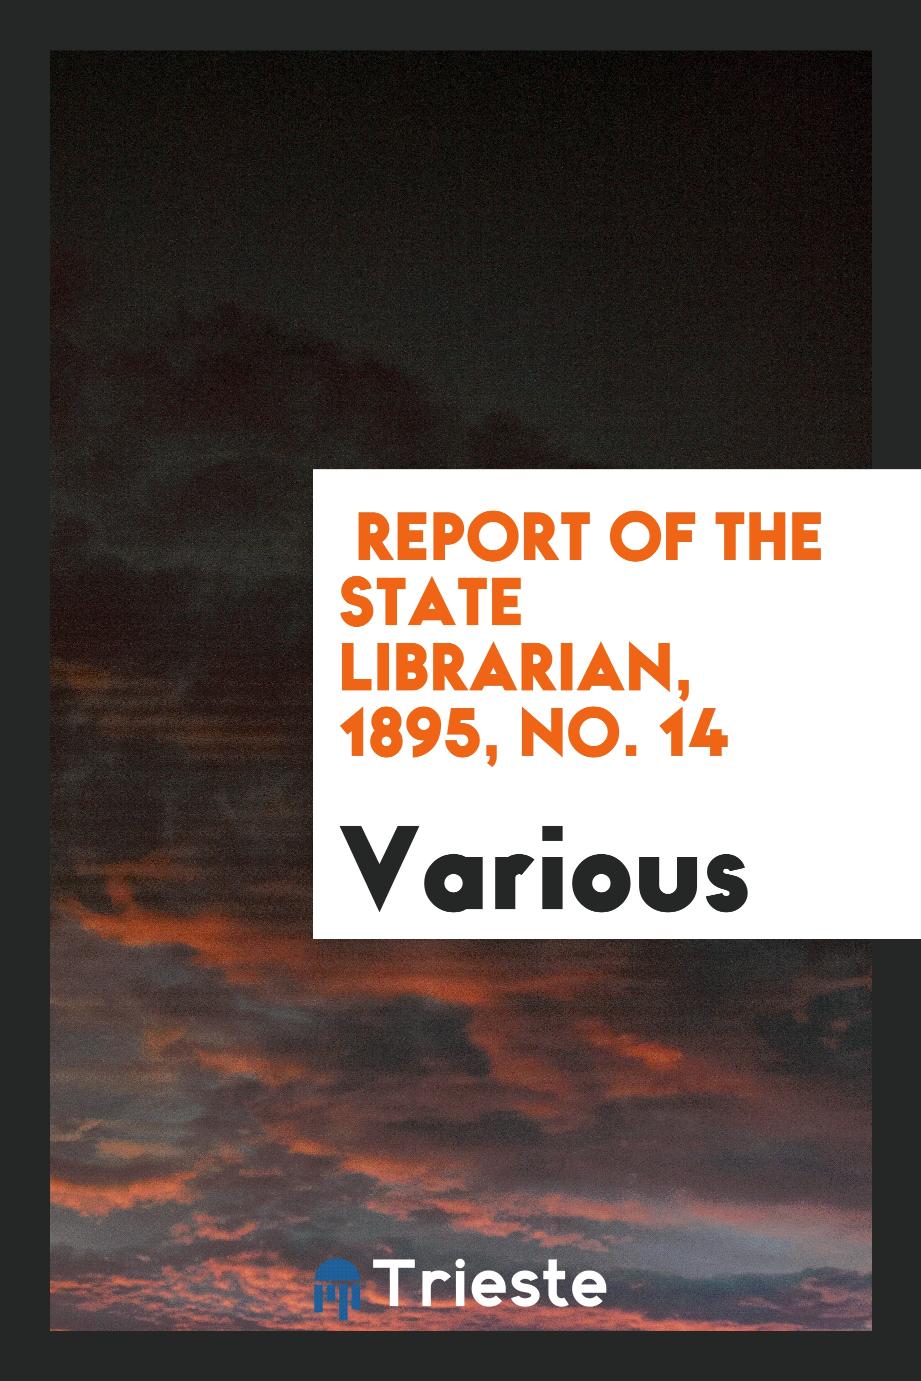 Report of the State Librarian, 1895, No. 14